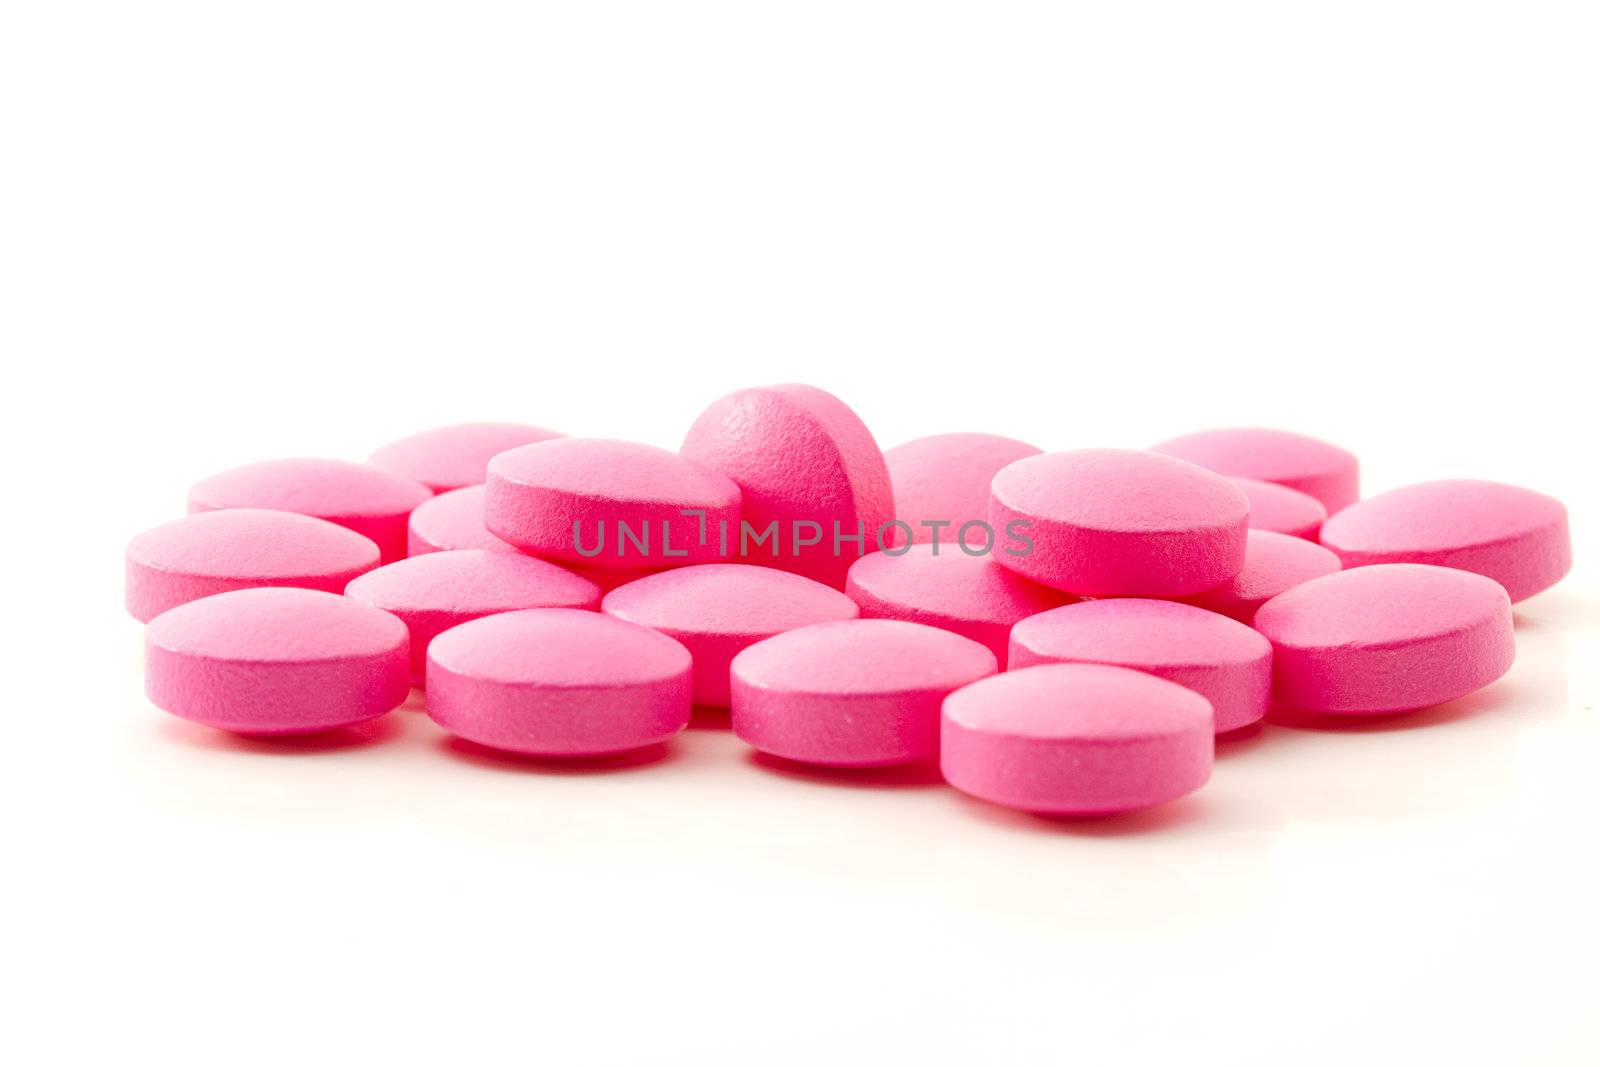 some pink painkiller pills on white background